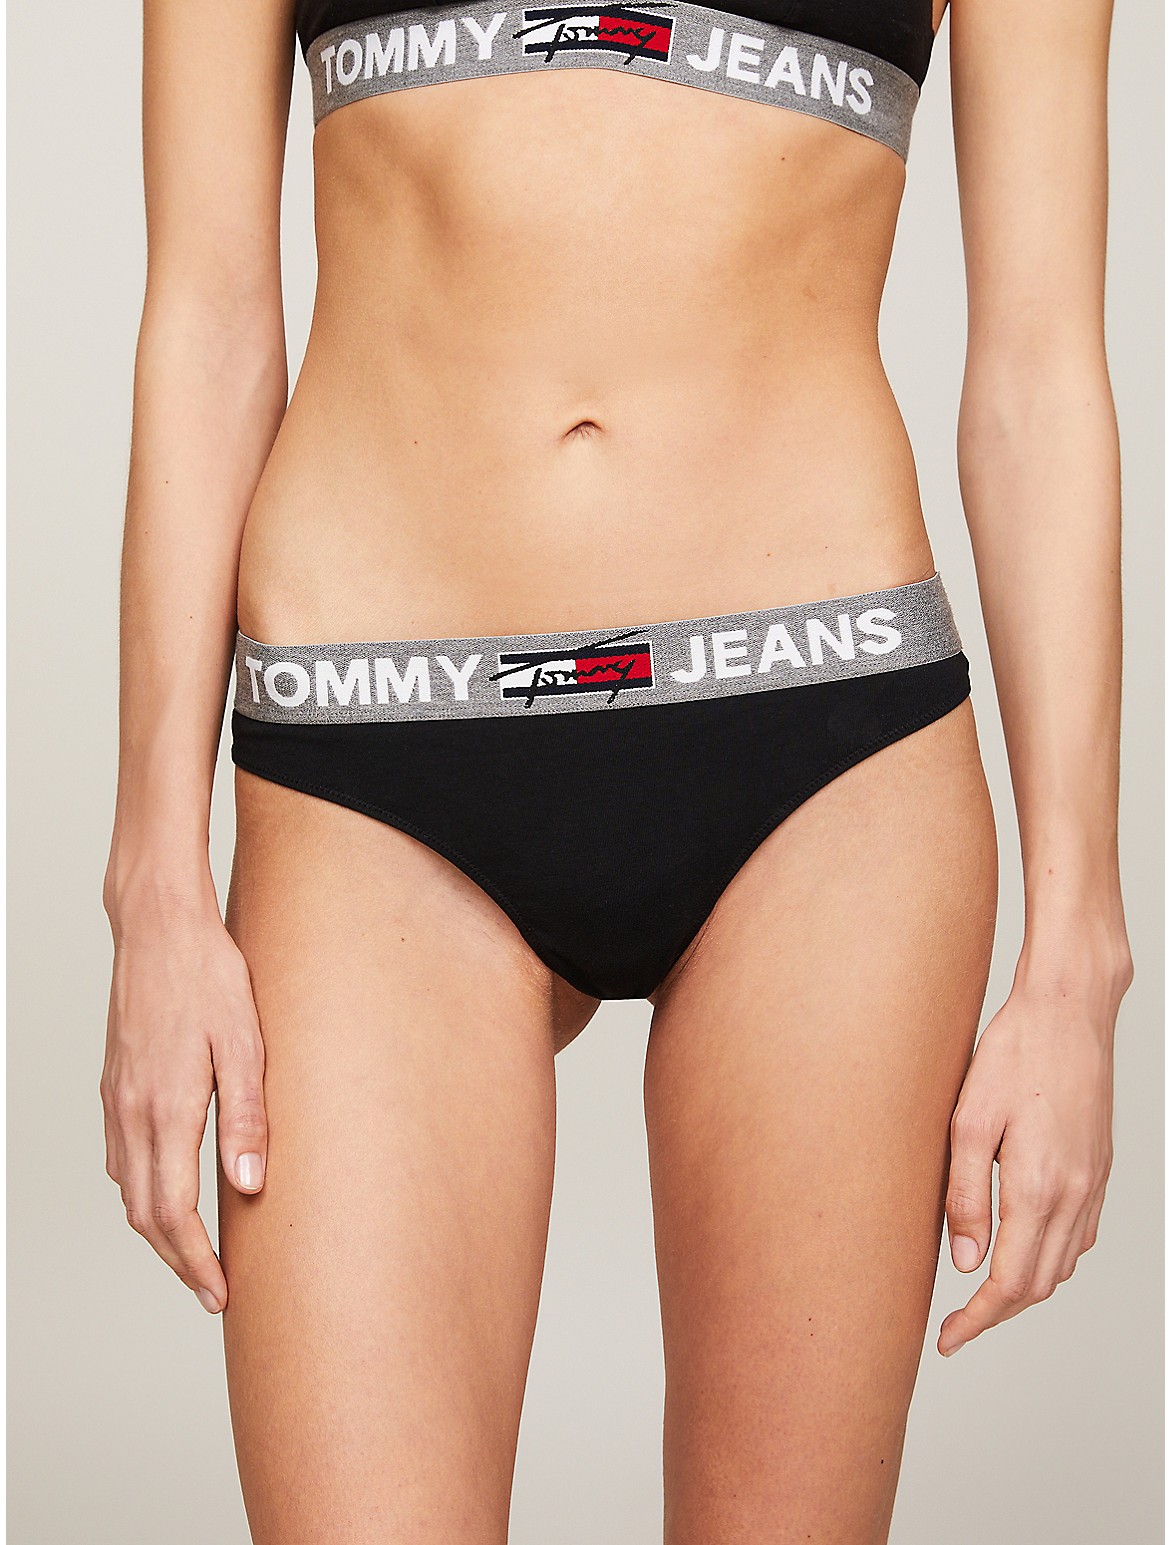 Tommy Jeans logo thong in black, ASOS